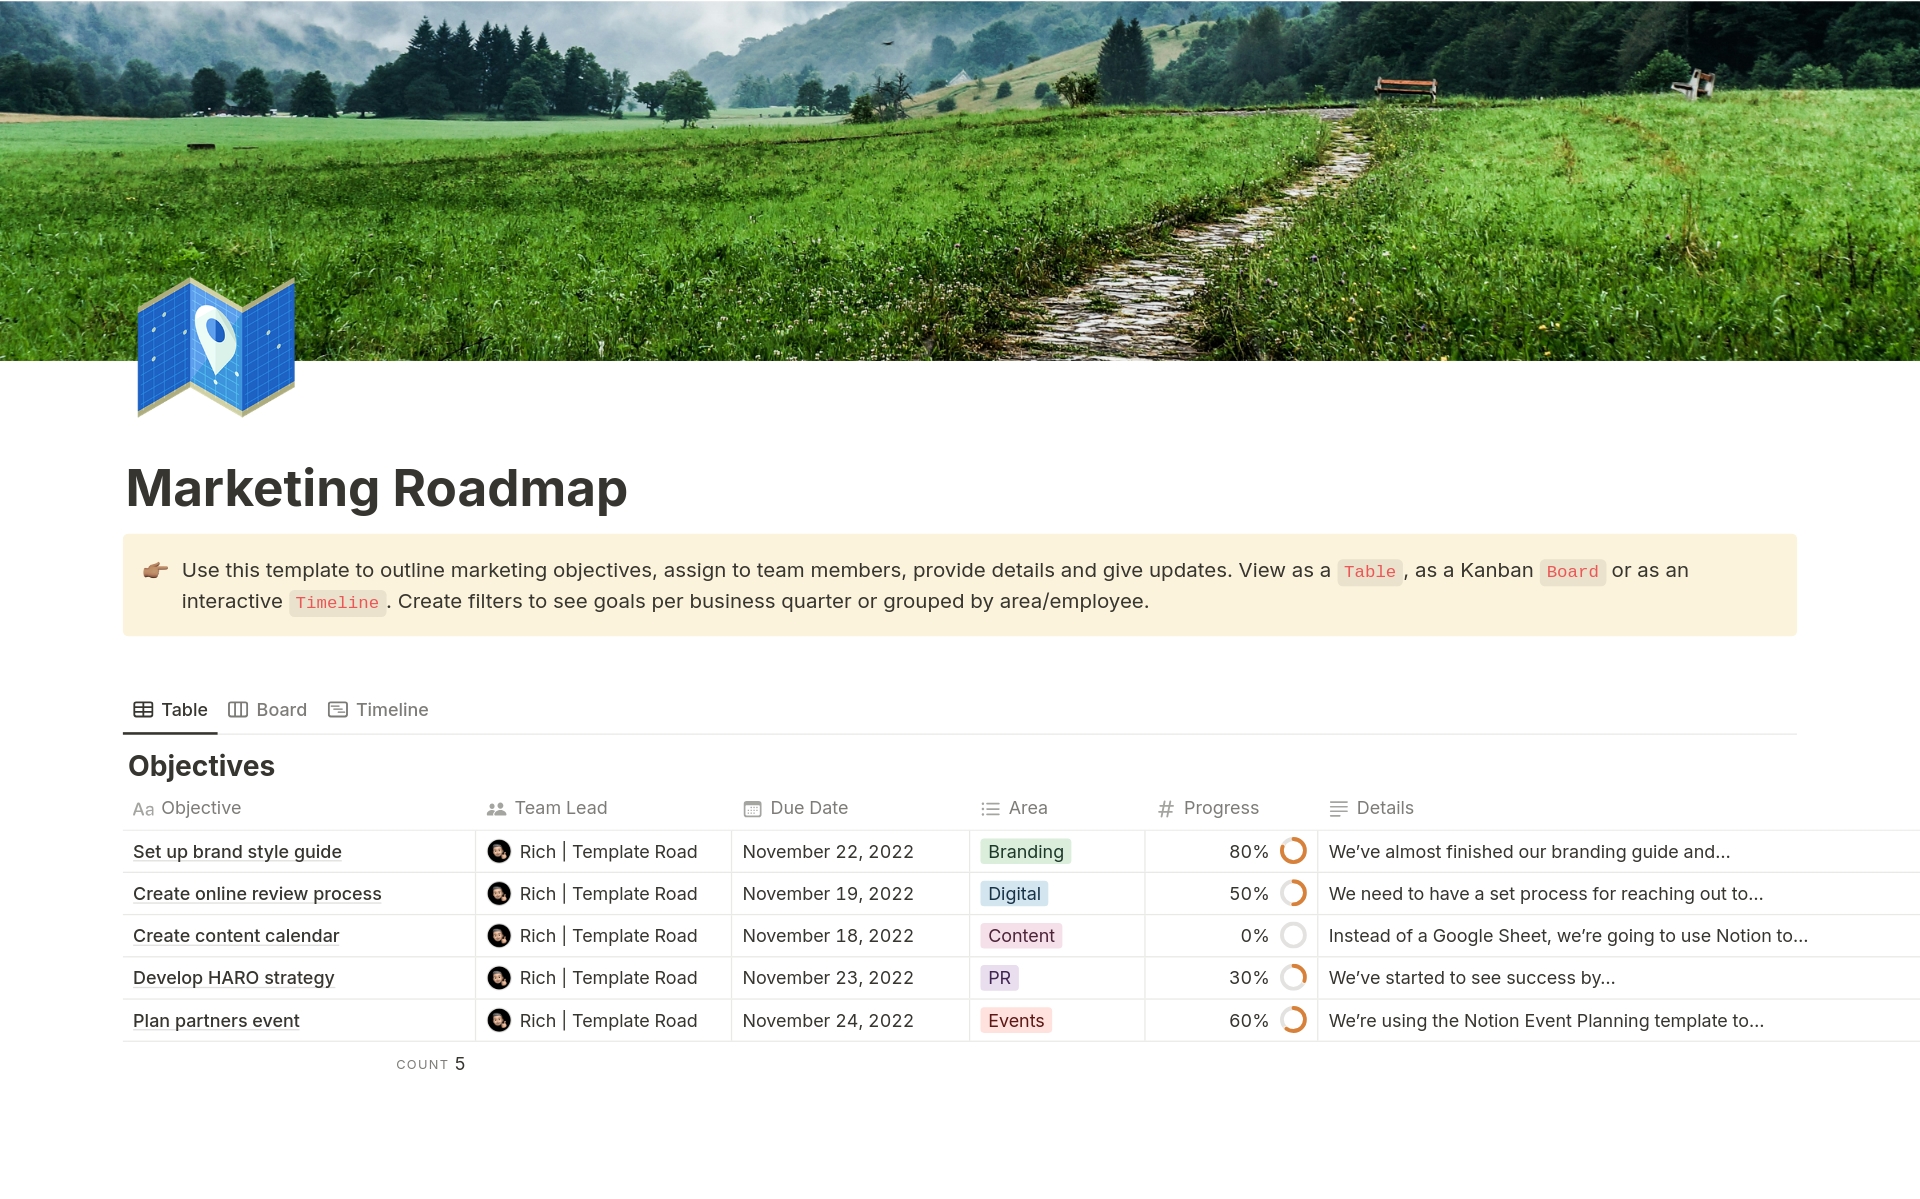 Use this template to create a roadmap for your marketing planning.